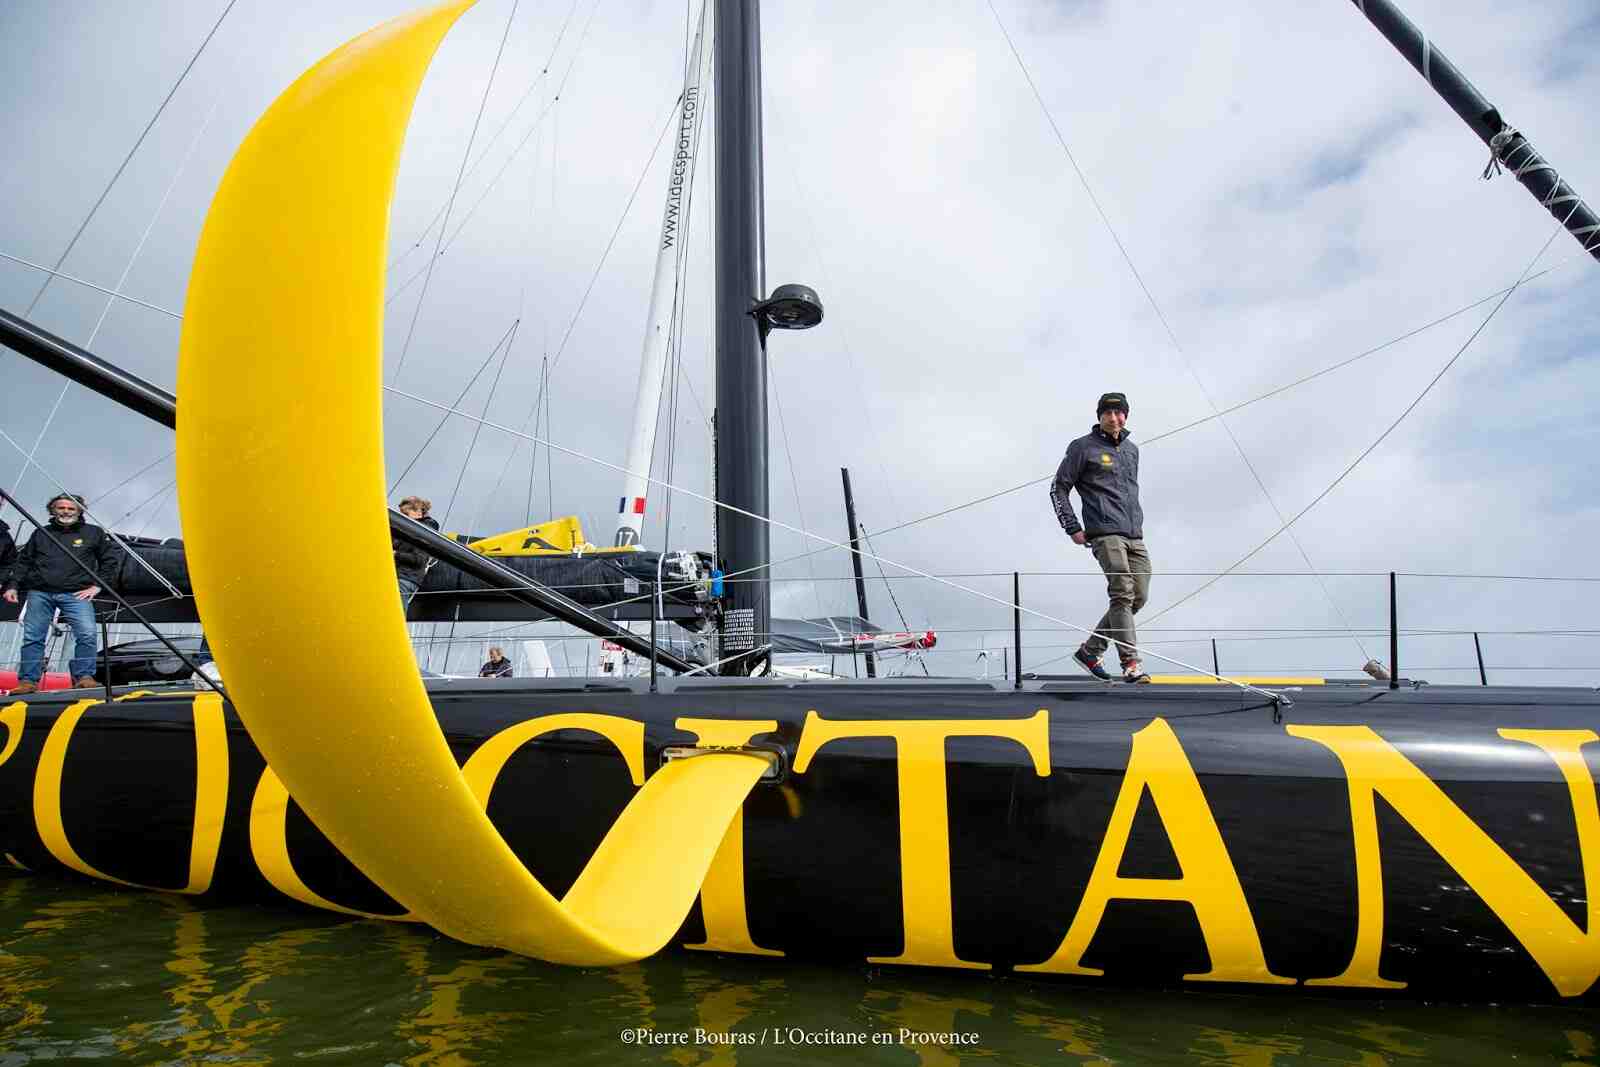 Comment Imoca Leaf agit-il?